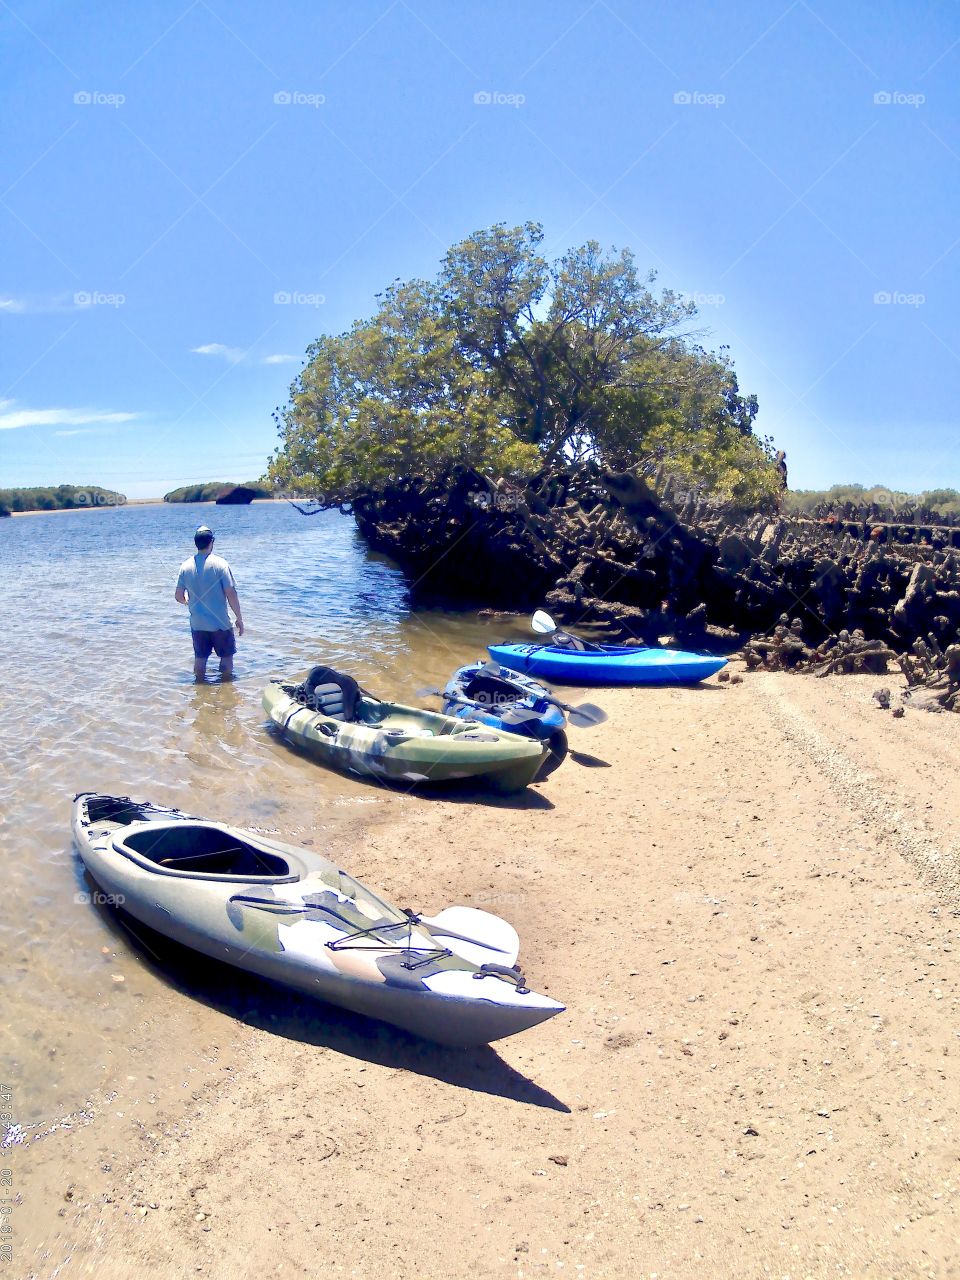 Kayakers taking a cooling wade around an old shipwreck overgrown with mangroves